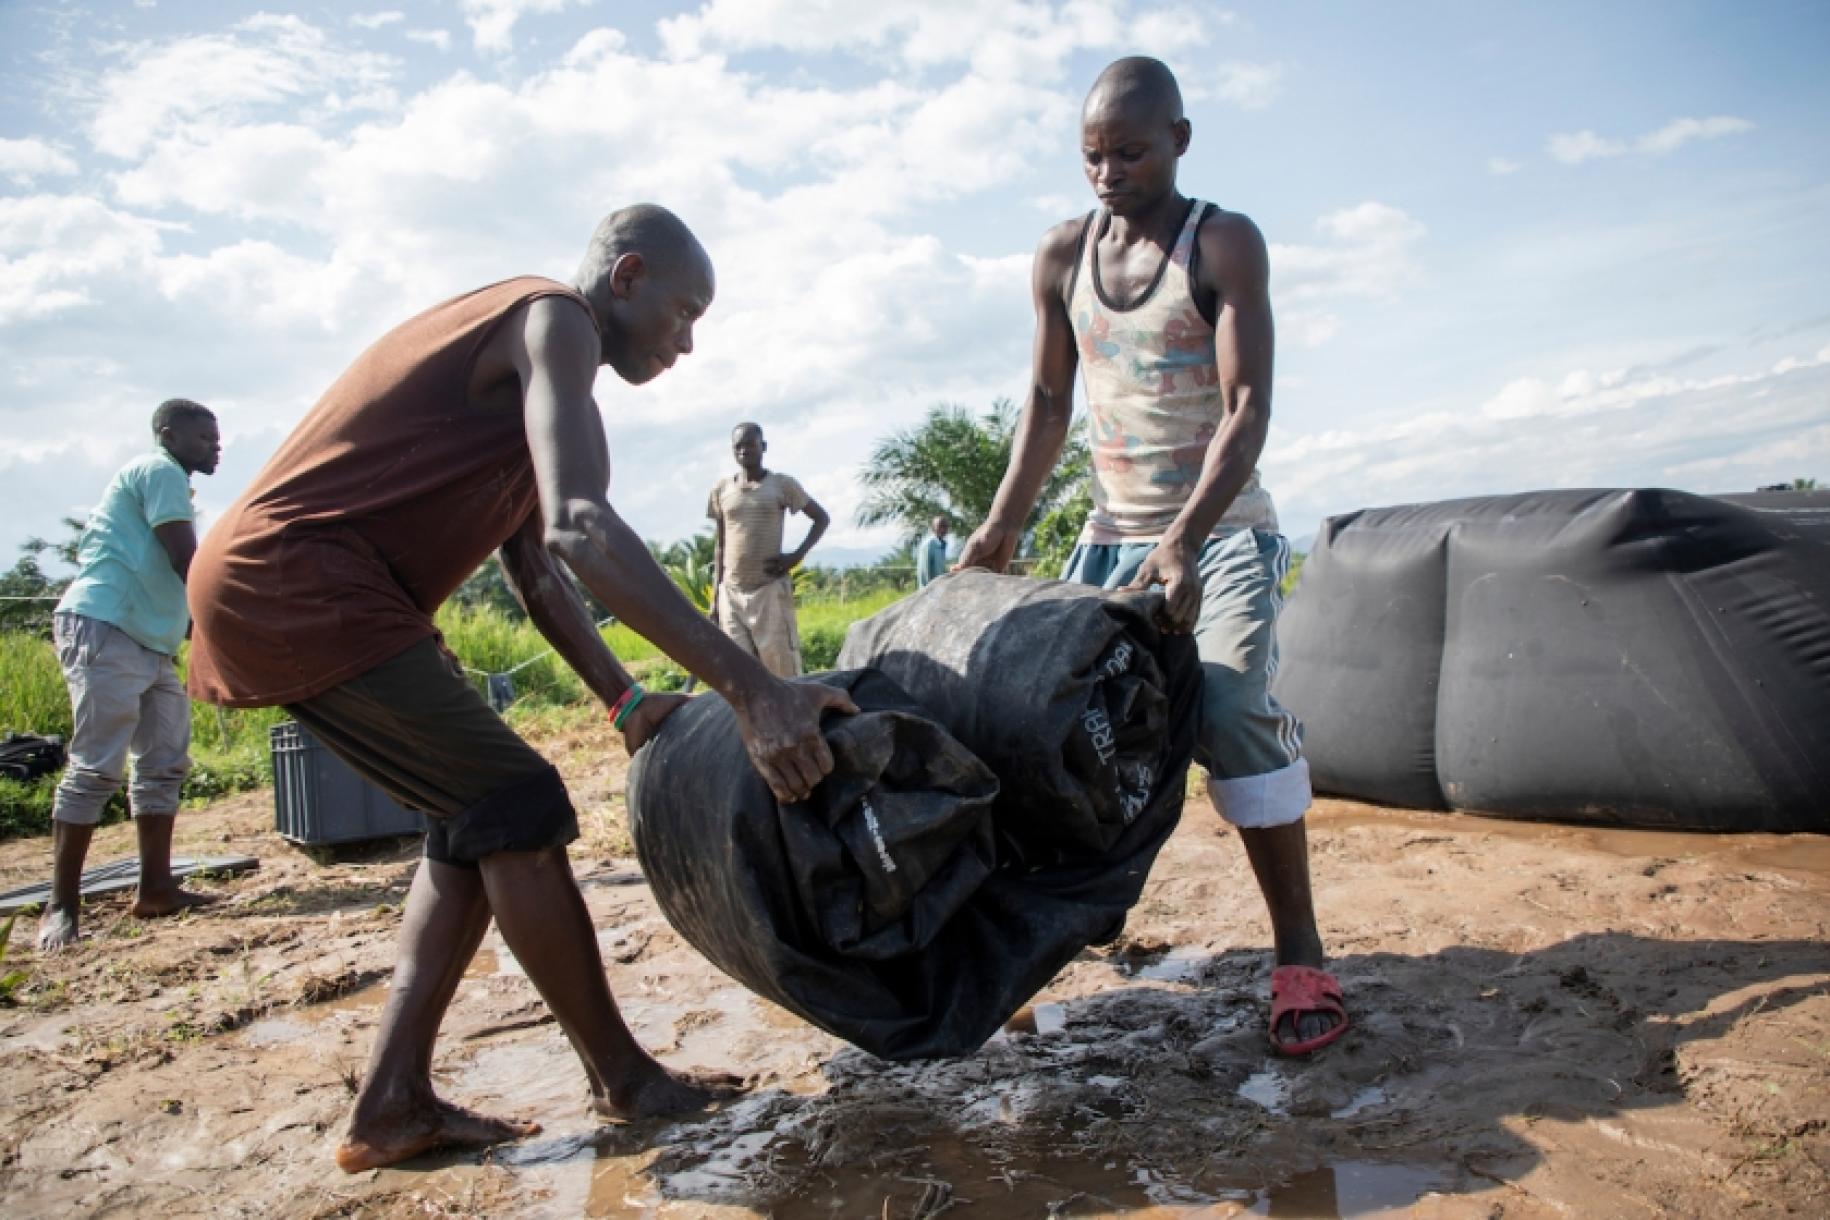 In Burundi, on a sunny day, two young men lift a large black tarpaulin rolled up in the middle of a muddy field, while two other men stand nearby.